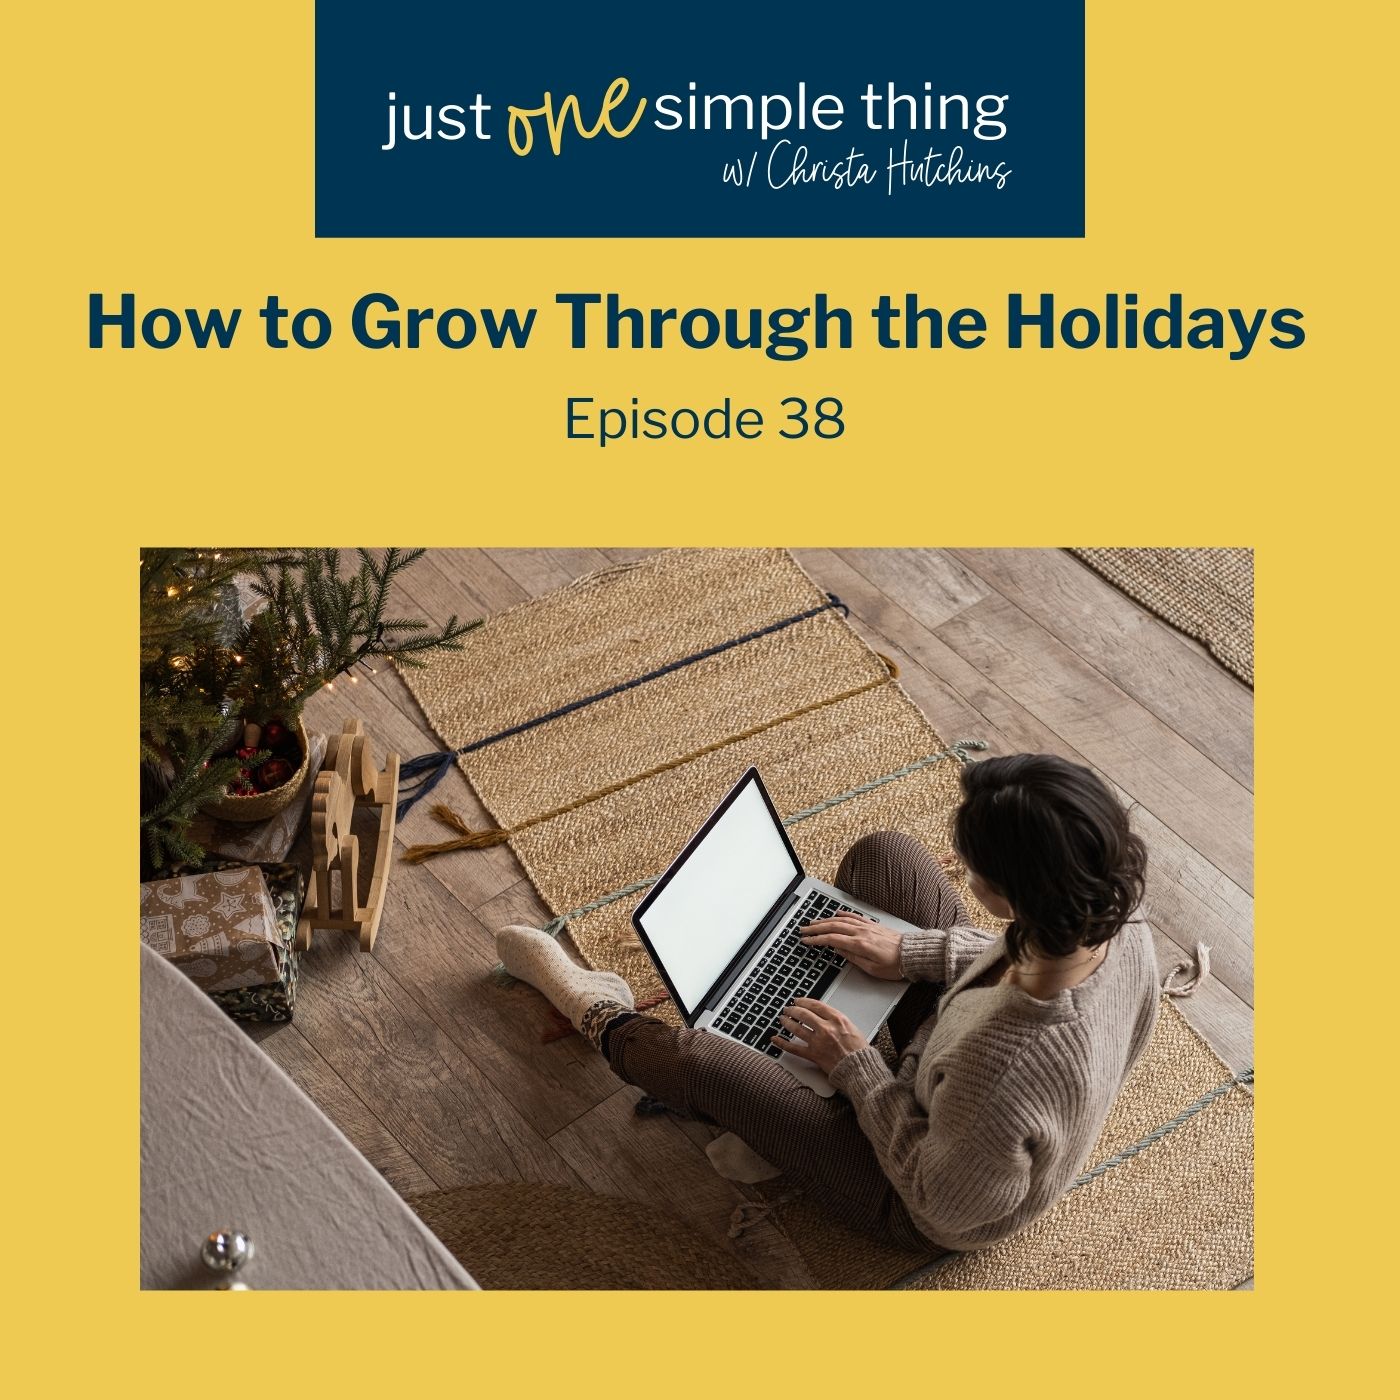 How to Grow Through the Holidays